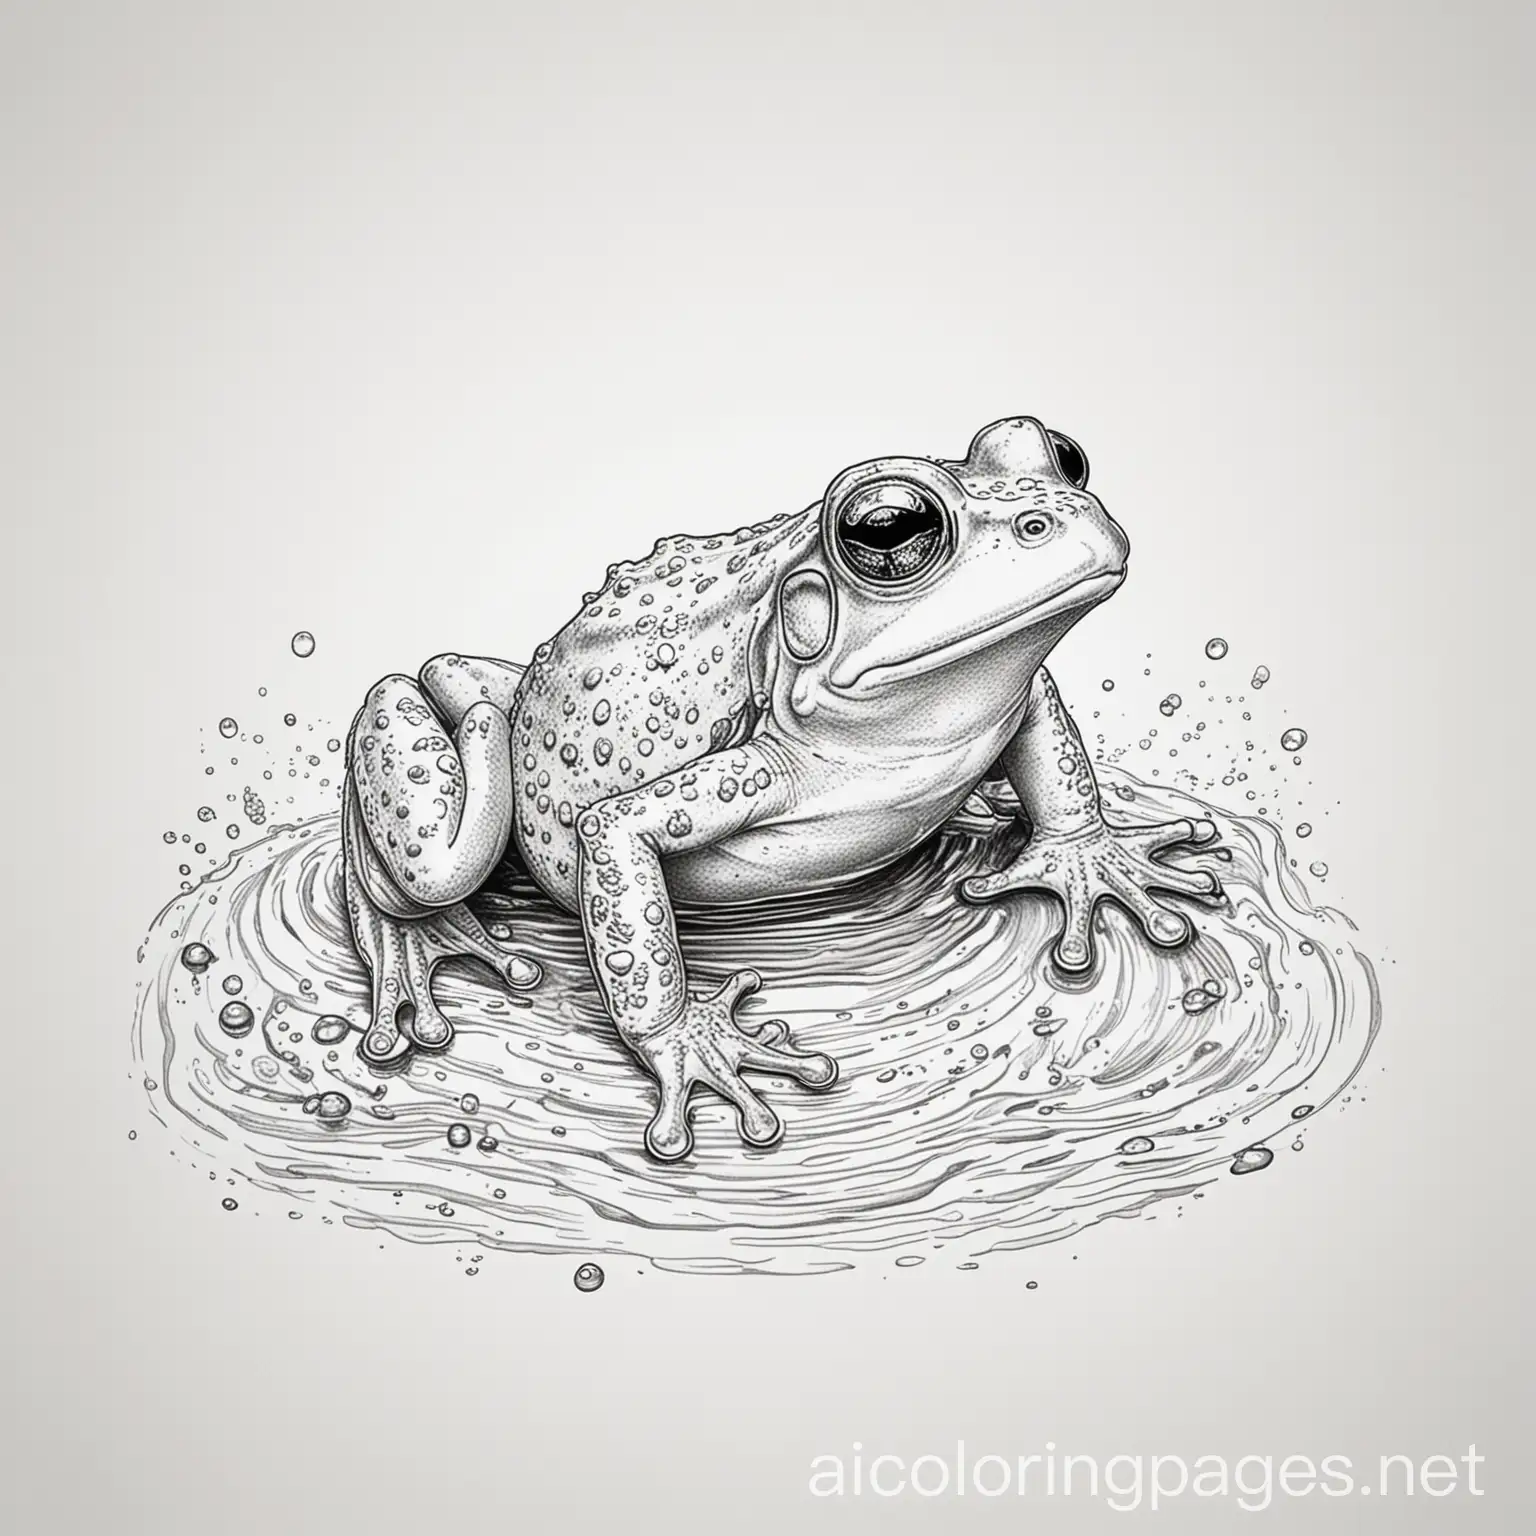 frog swimmg, Coloring Page, black and white, line art, white background, Simplicity, Ample White Space. The background of the coloring page is plain white to make it easy for young children to color within the lines. The outlines of all the subjects are easy to distinguish, making it simple for kids to color without too much difficulty